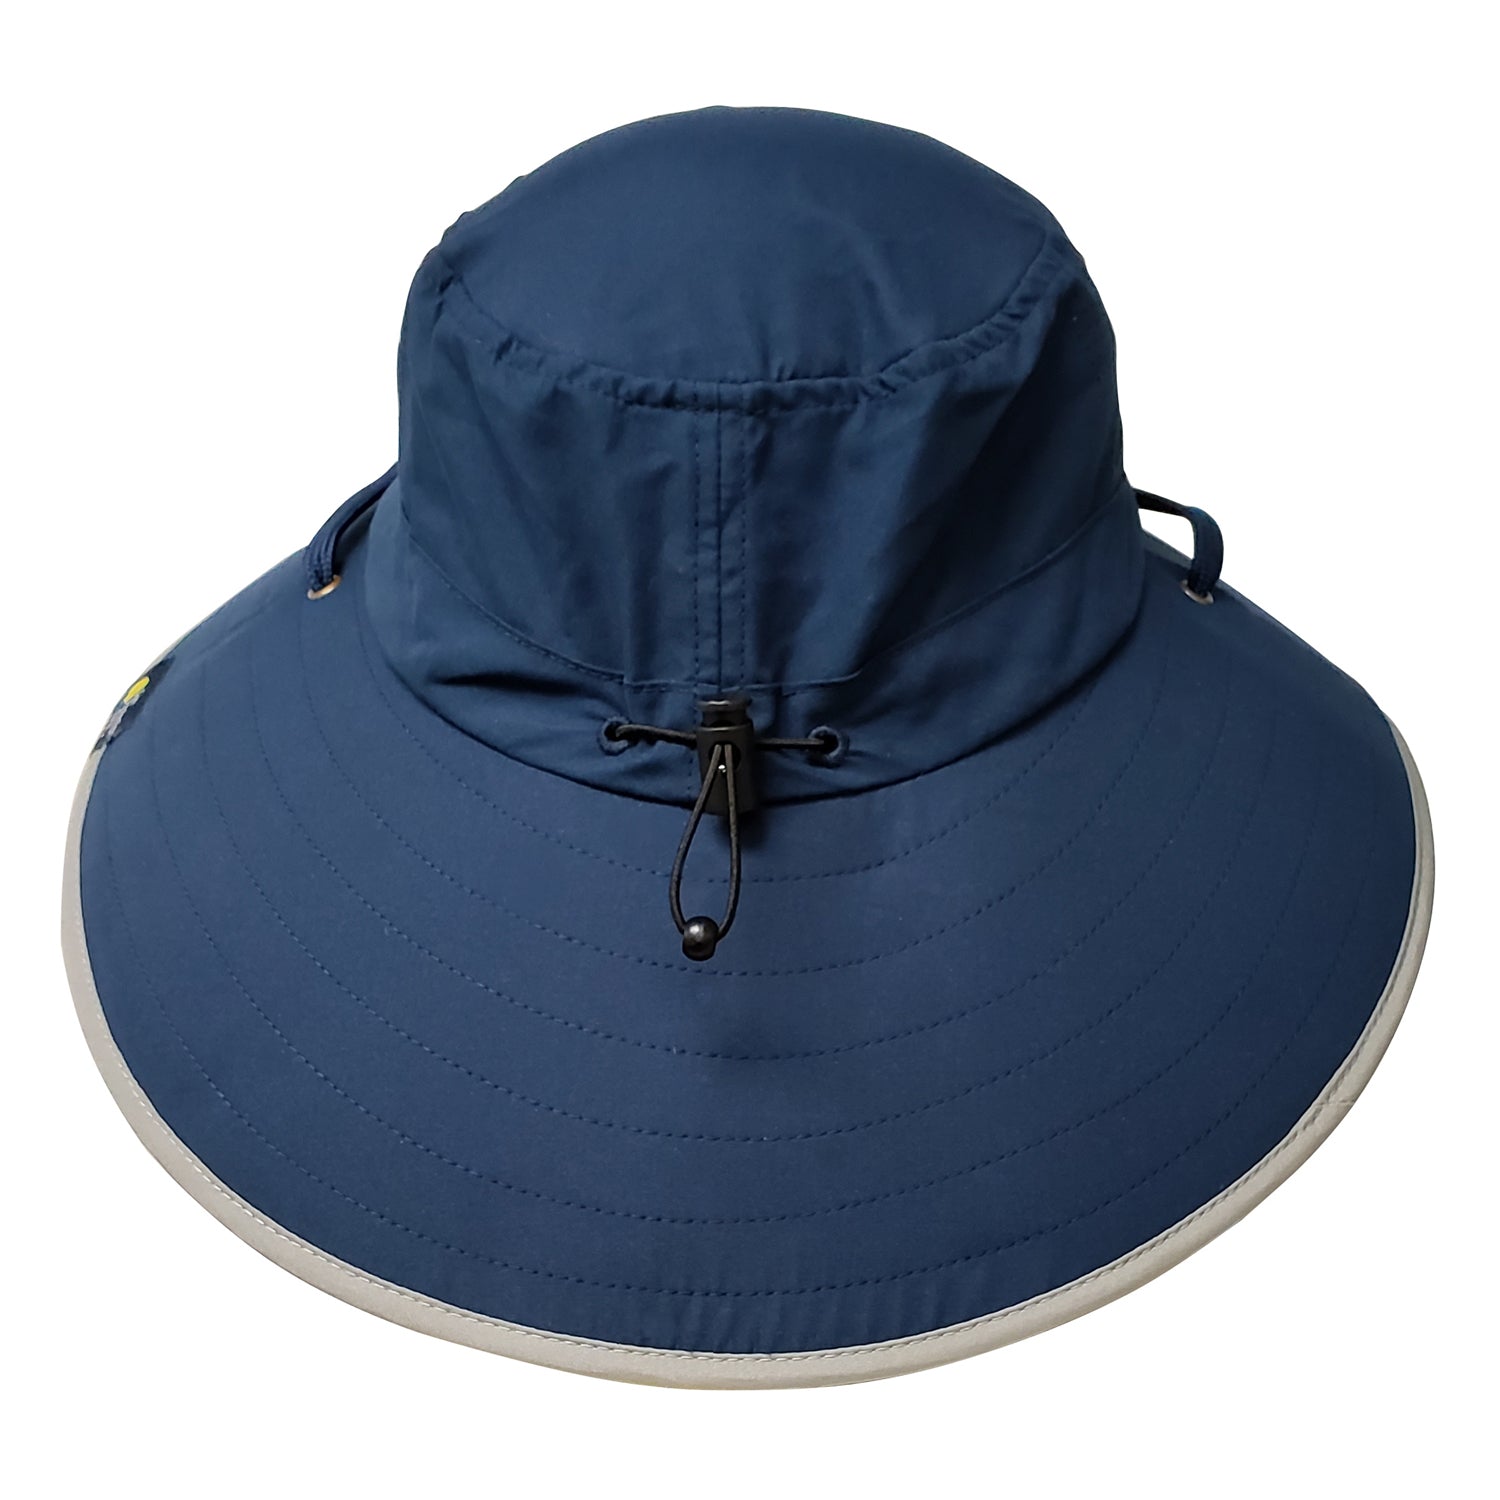 Adult Booney Hat - Navy with Silver Trim – Sun Protection Zone